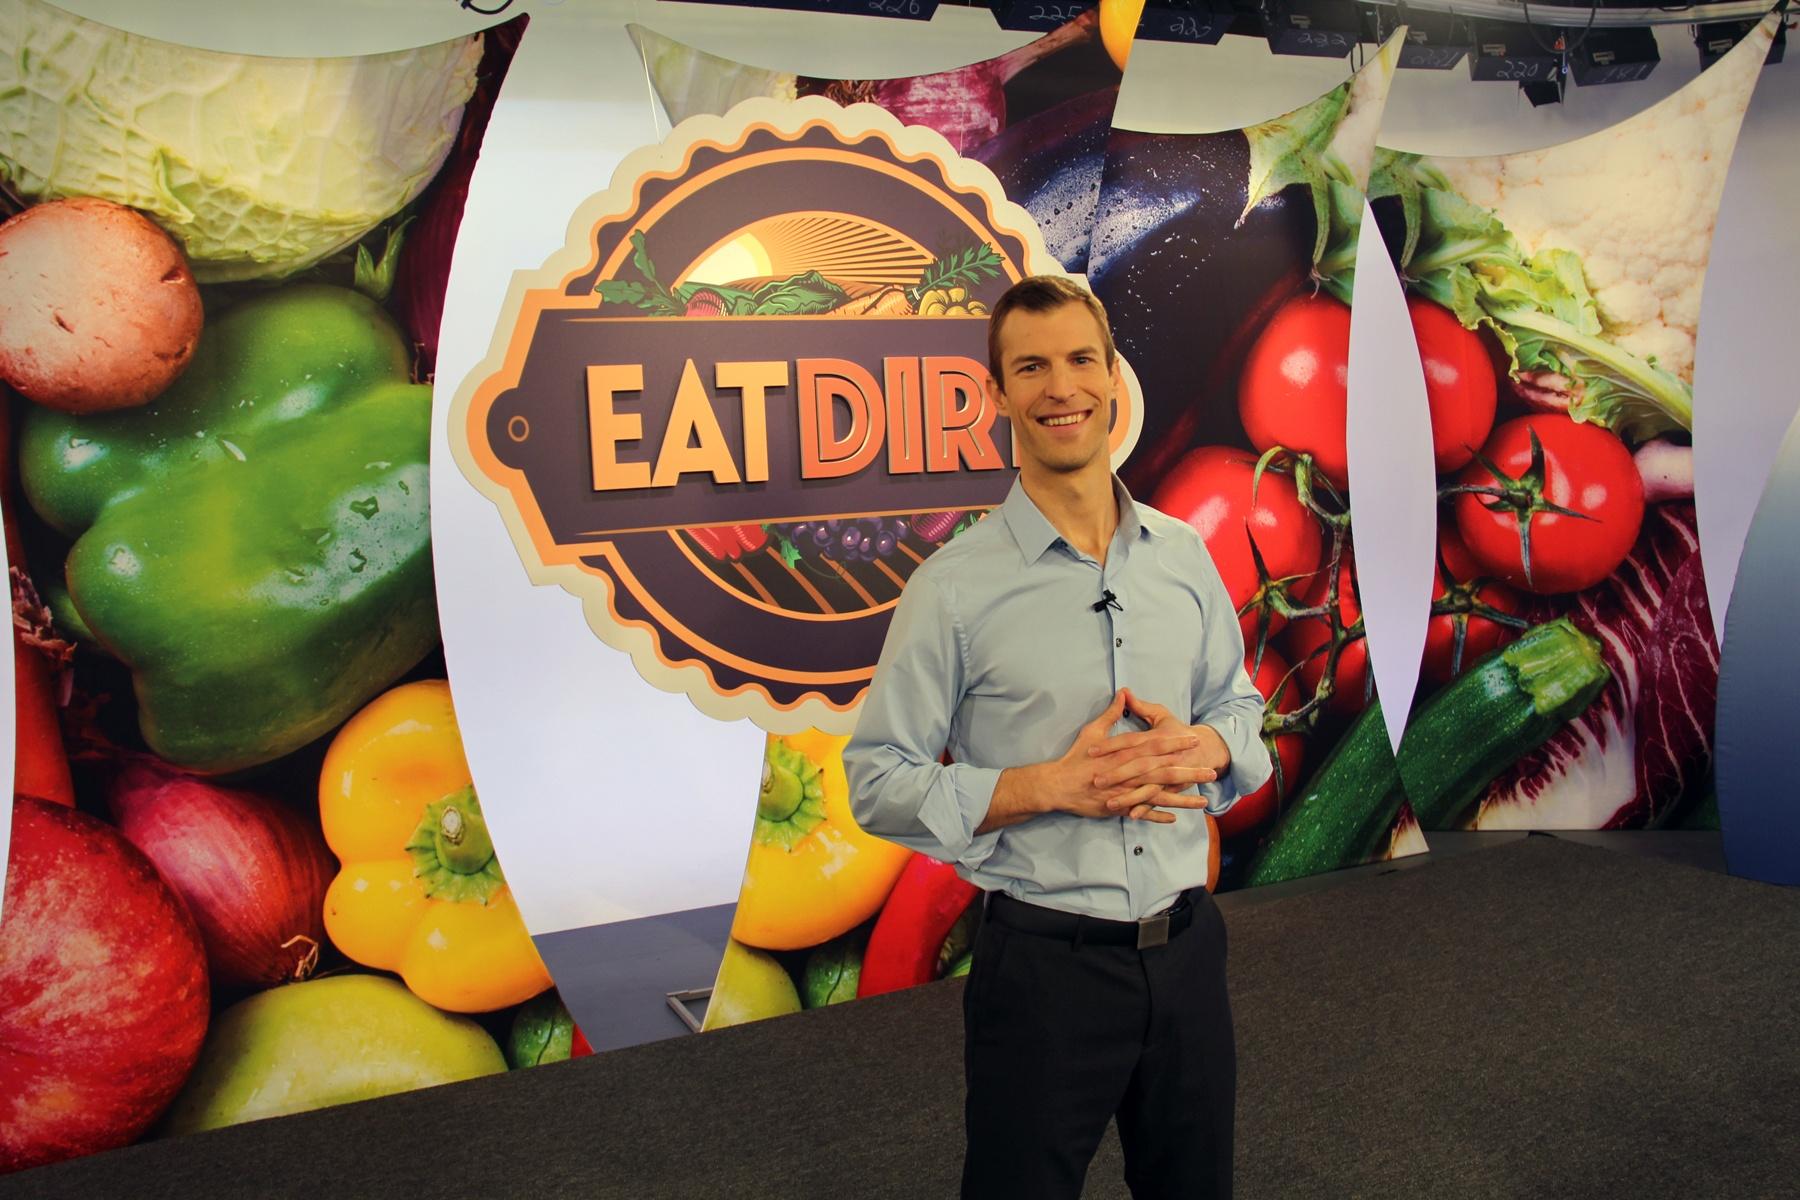 Man stands in front of sign that says "Eat Dirt"